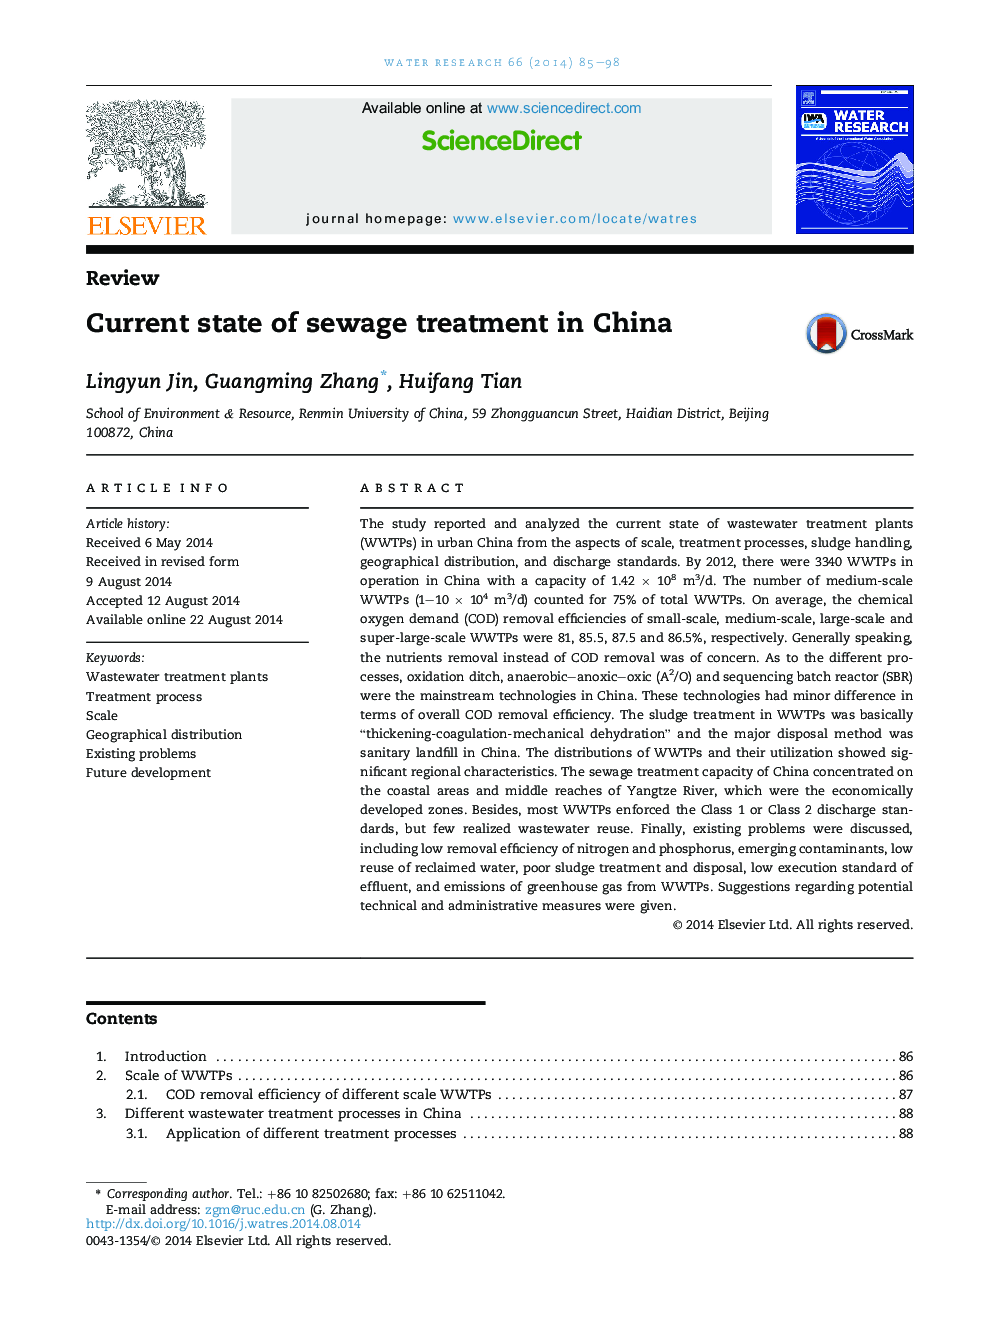 Current state of sewage treatment in China